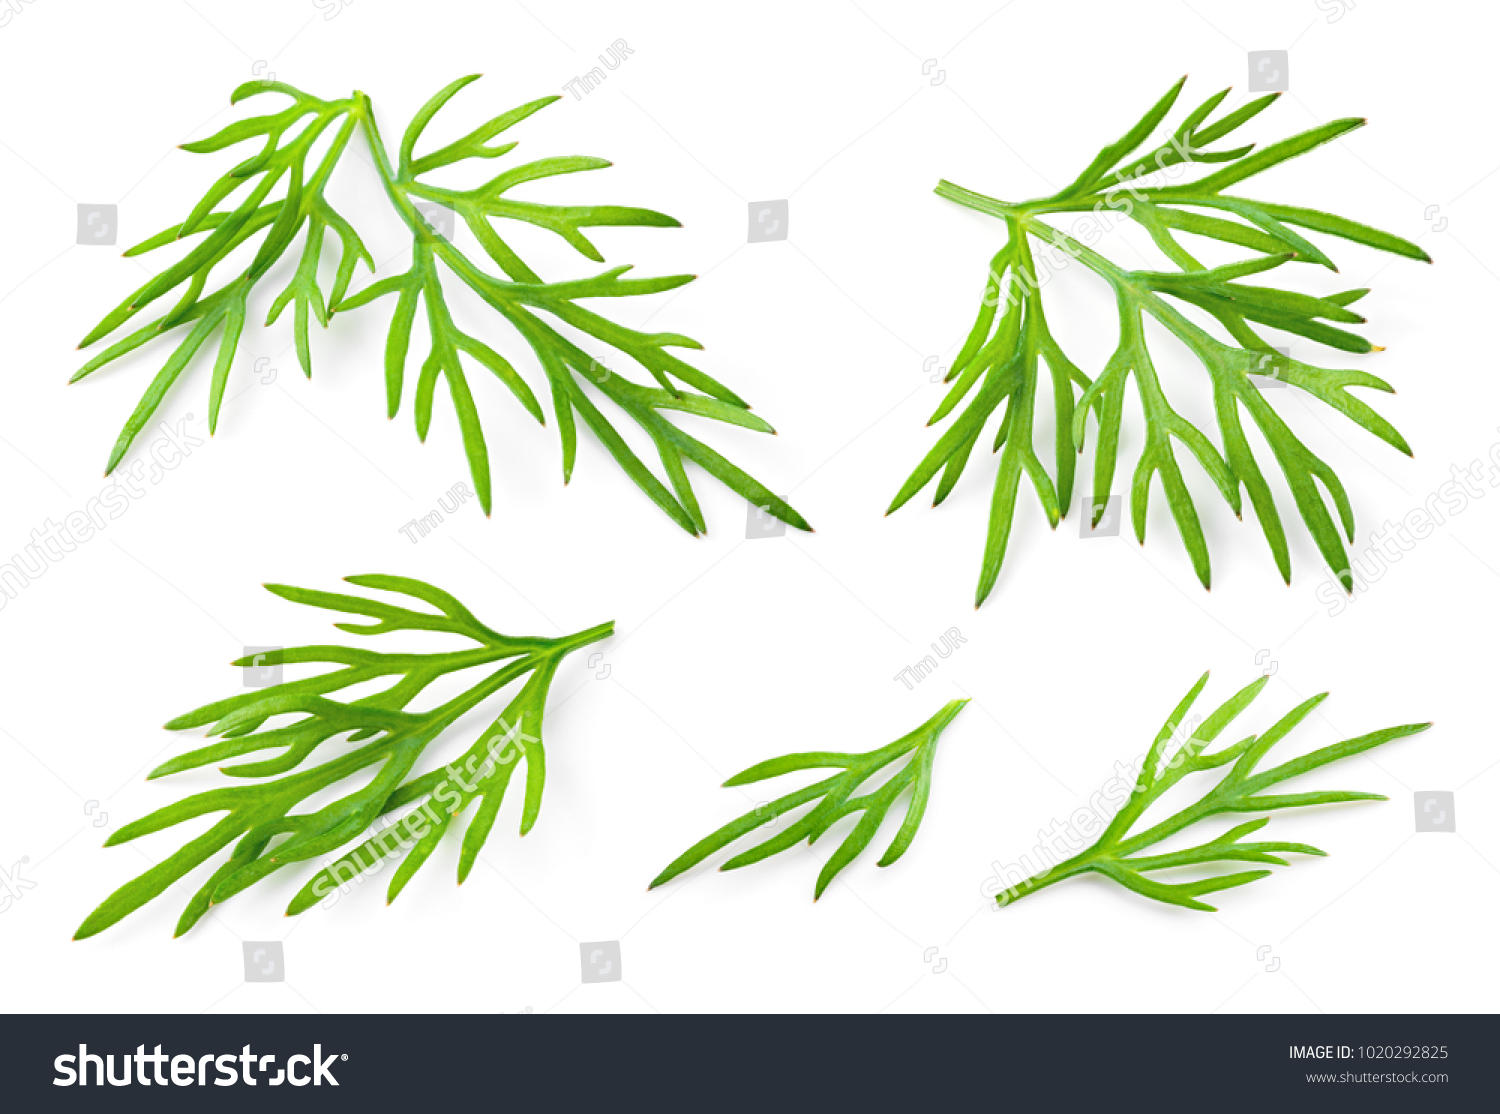 Dill. Fresh dill herb isolated on white. Collection. #1020292825